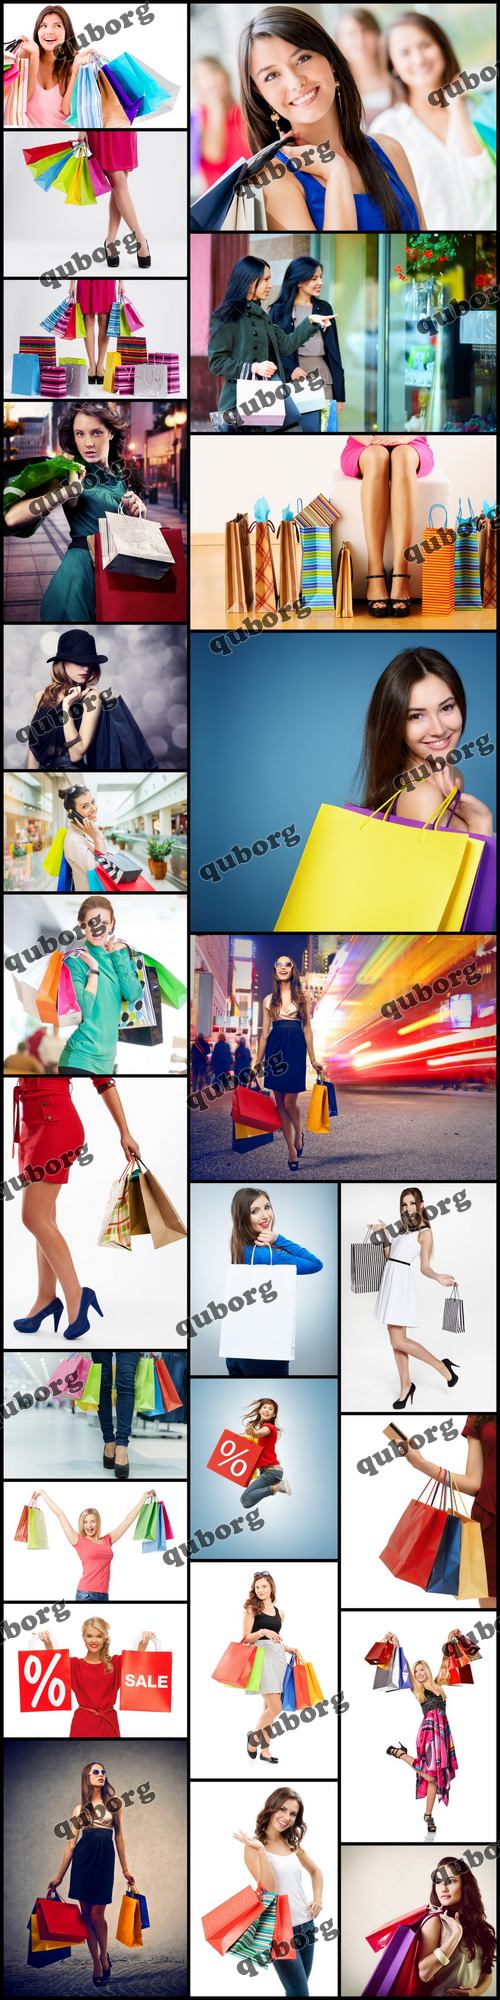 Stock Photos - Woman with Shopping Bags 6